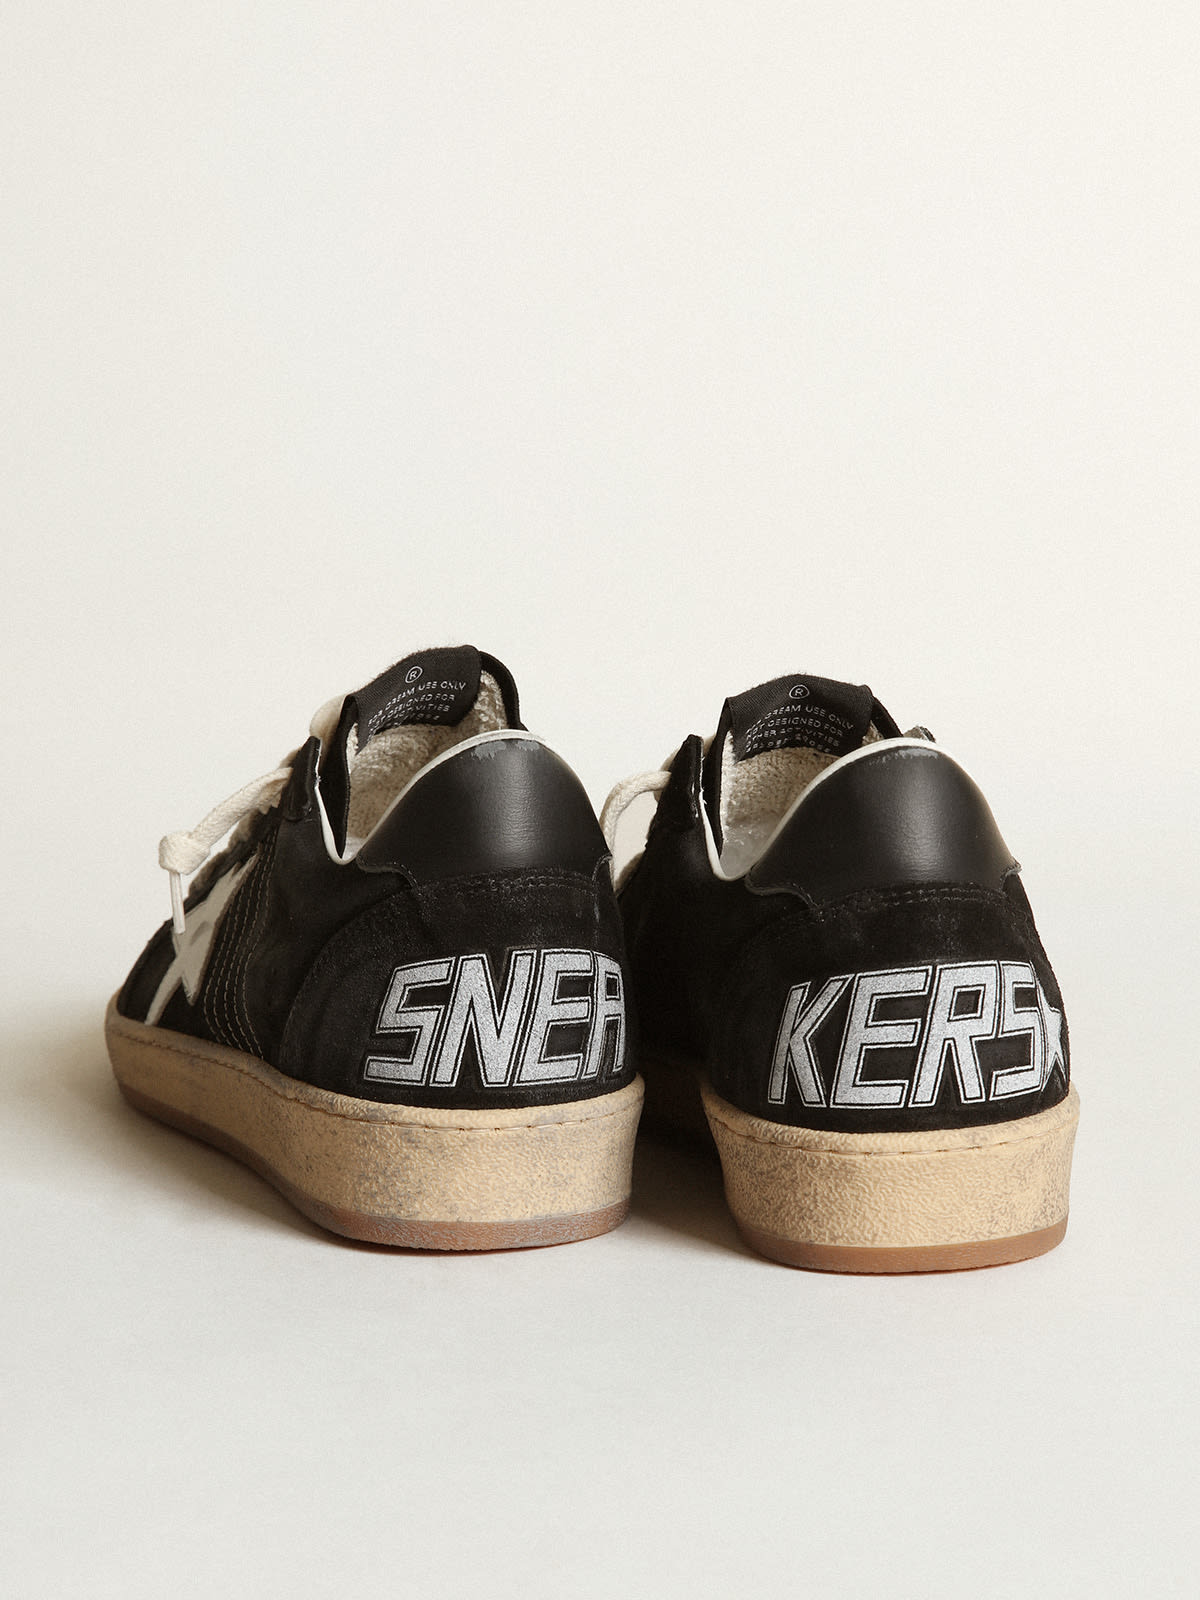 Golden Goose - Men's Ball Star in black suede with white leather star in 